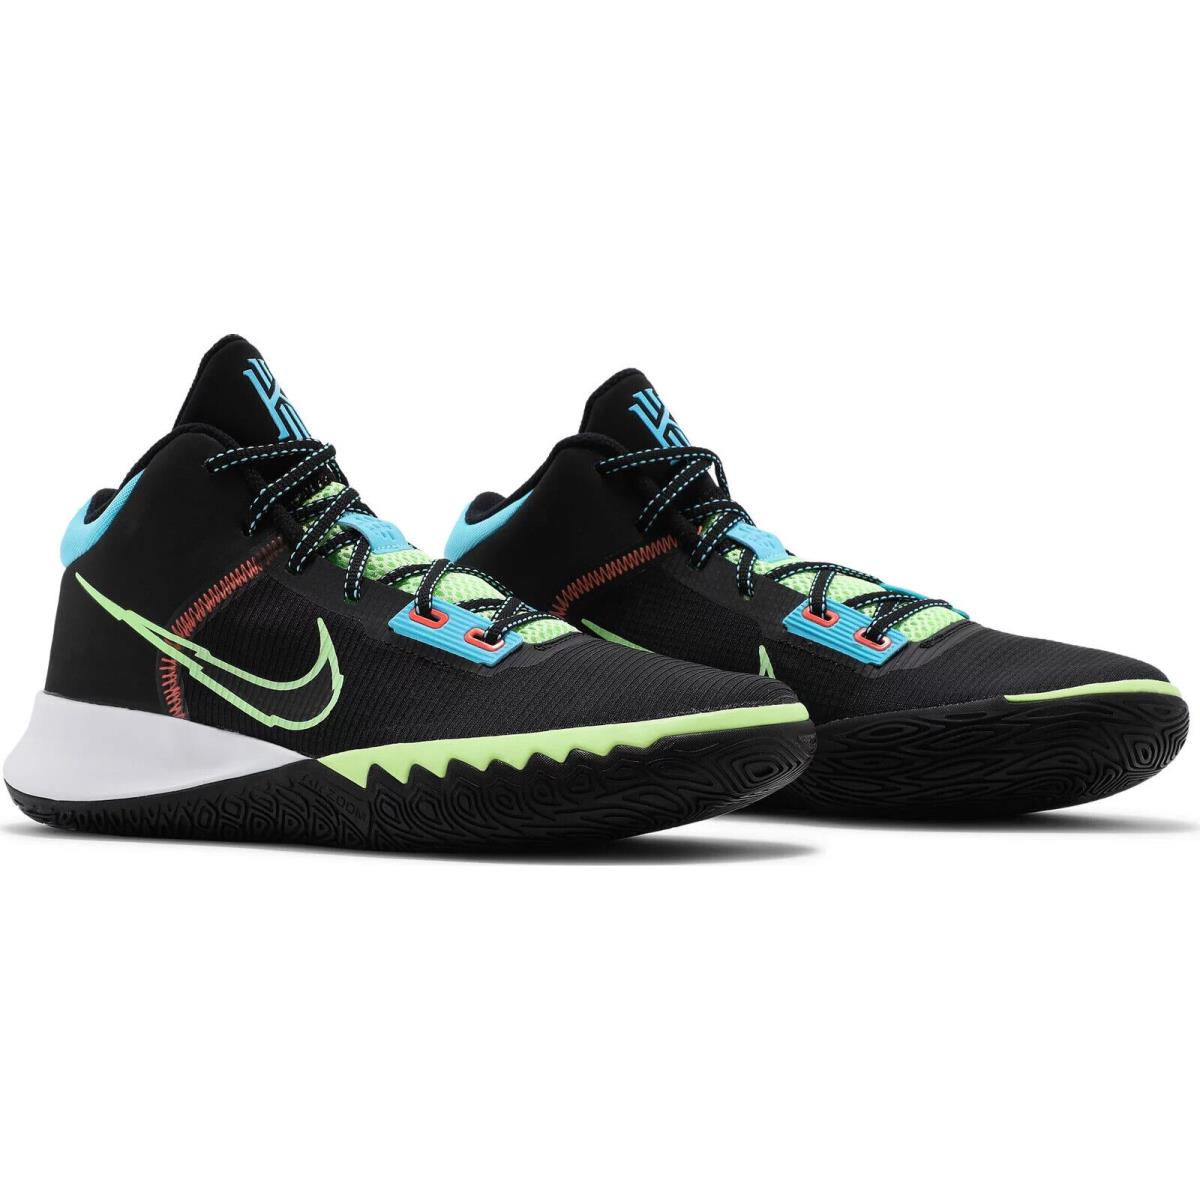 Nike Kyrie Flytrap 4 CT1972-003 Men Black Lime Glow Athletic Running Shoes DC319